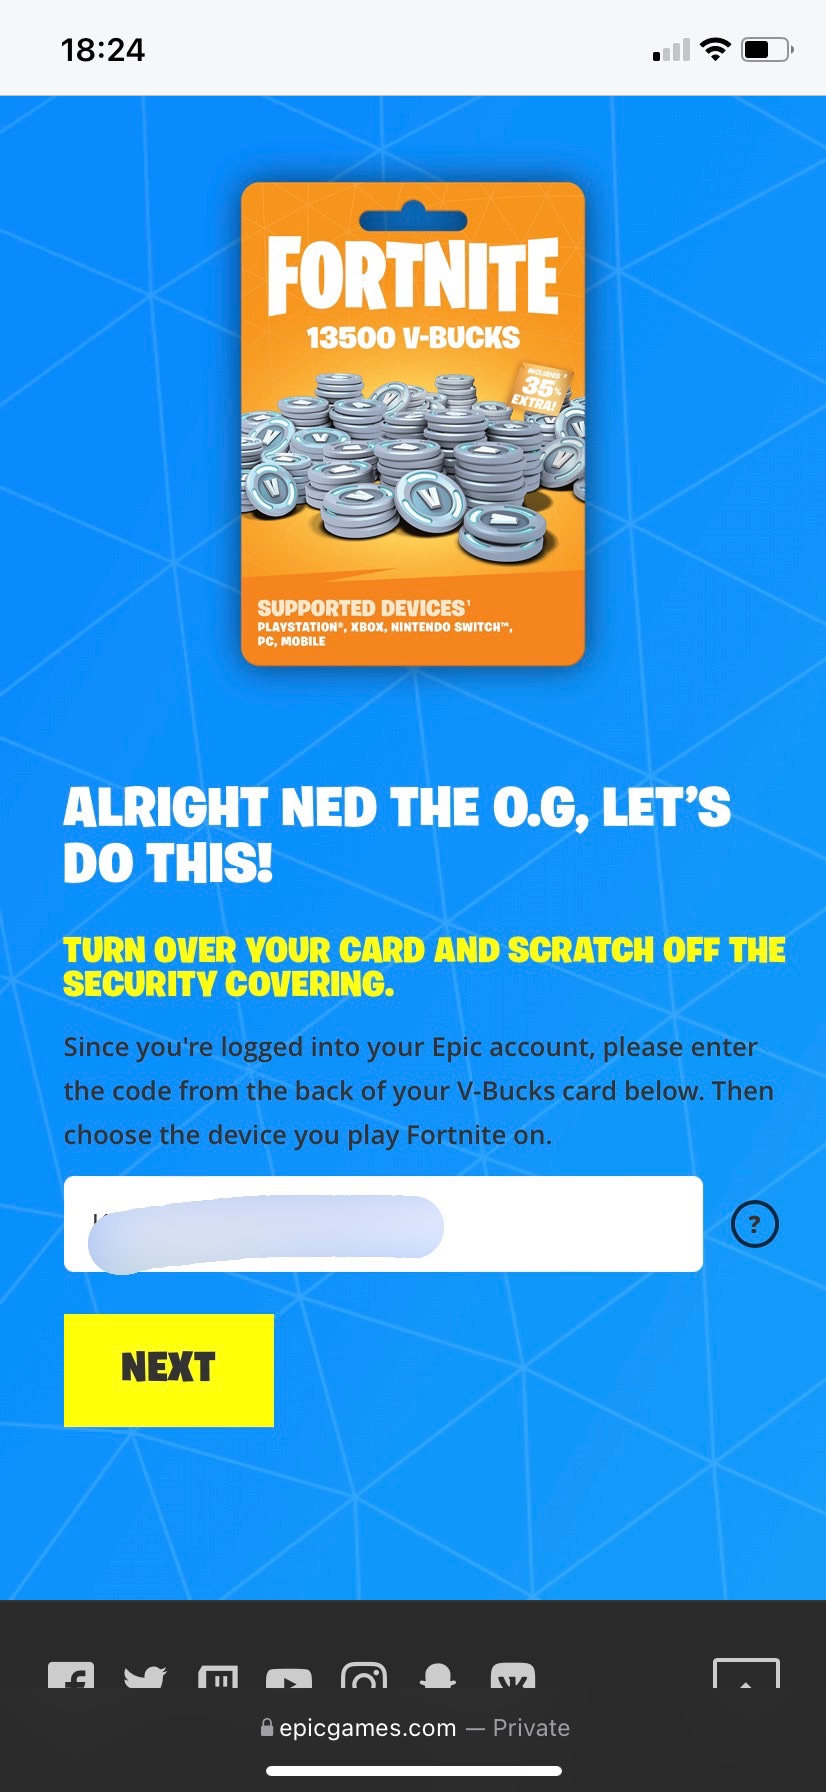 How to redeem a V-Bucks card - Fortnite Support